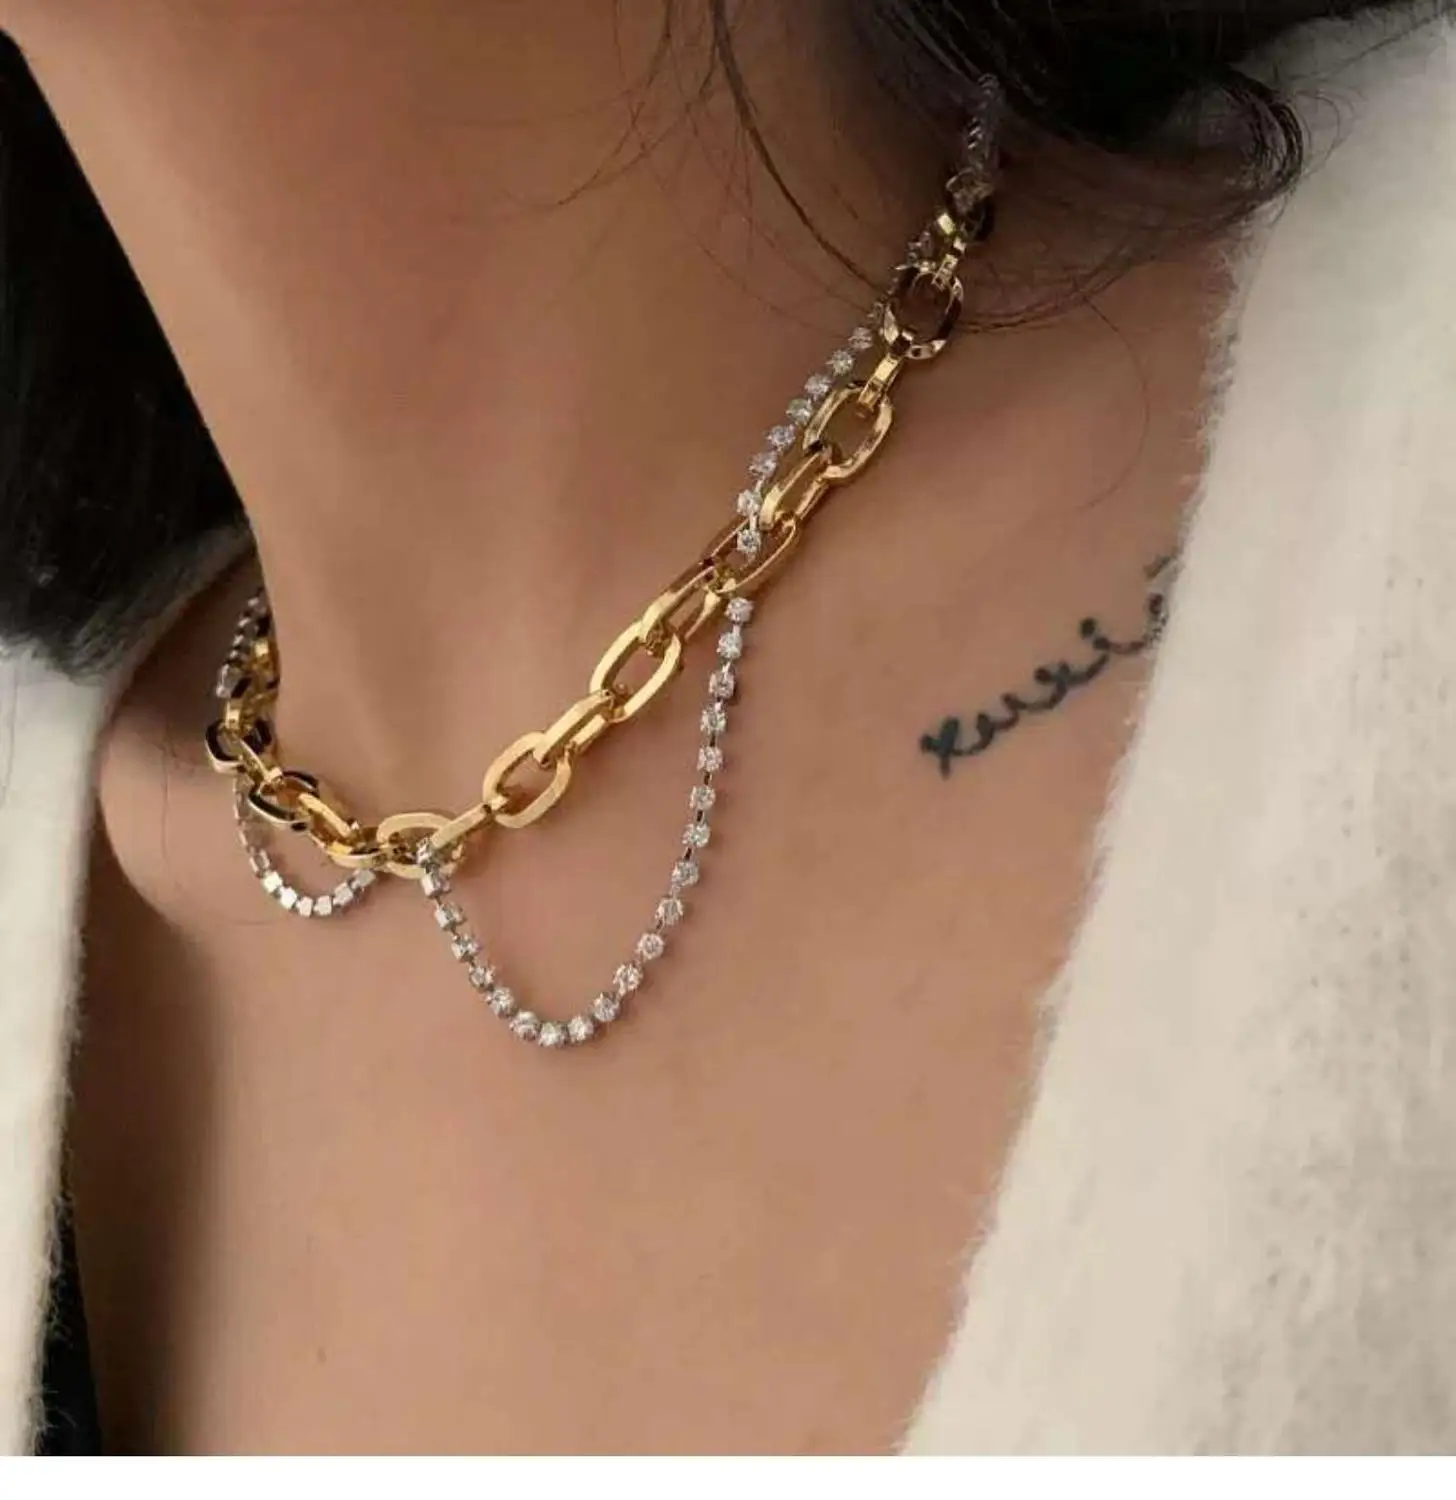 factory wholesale fashion jewelry gold necklace| Alibaba.com